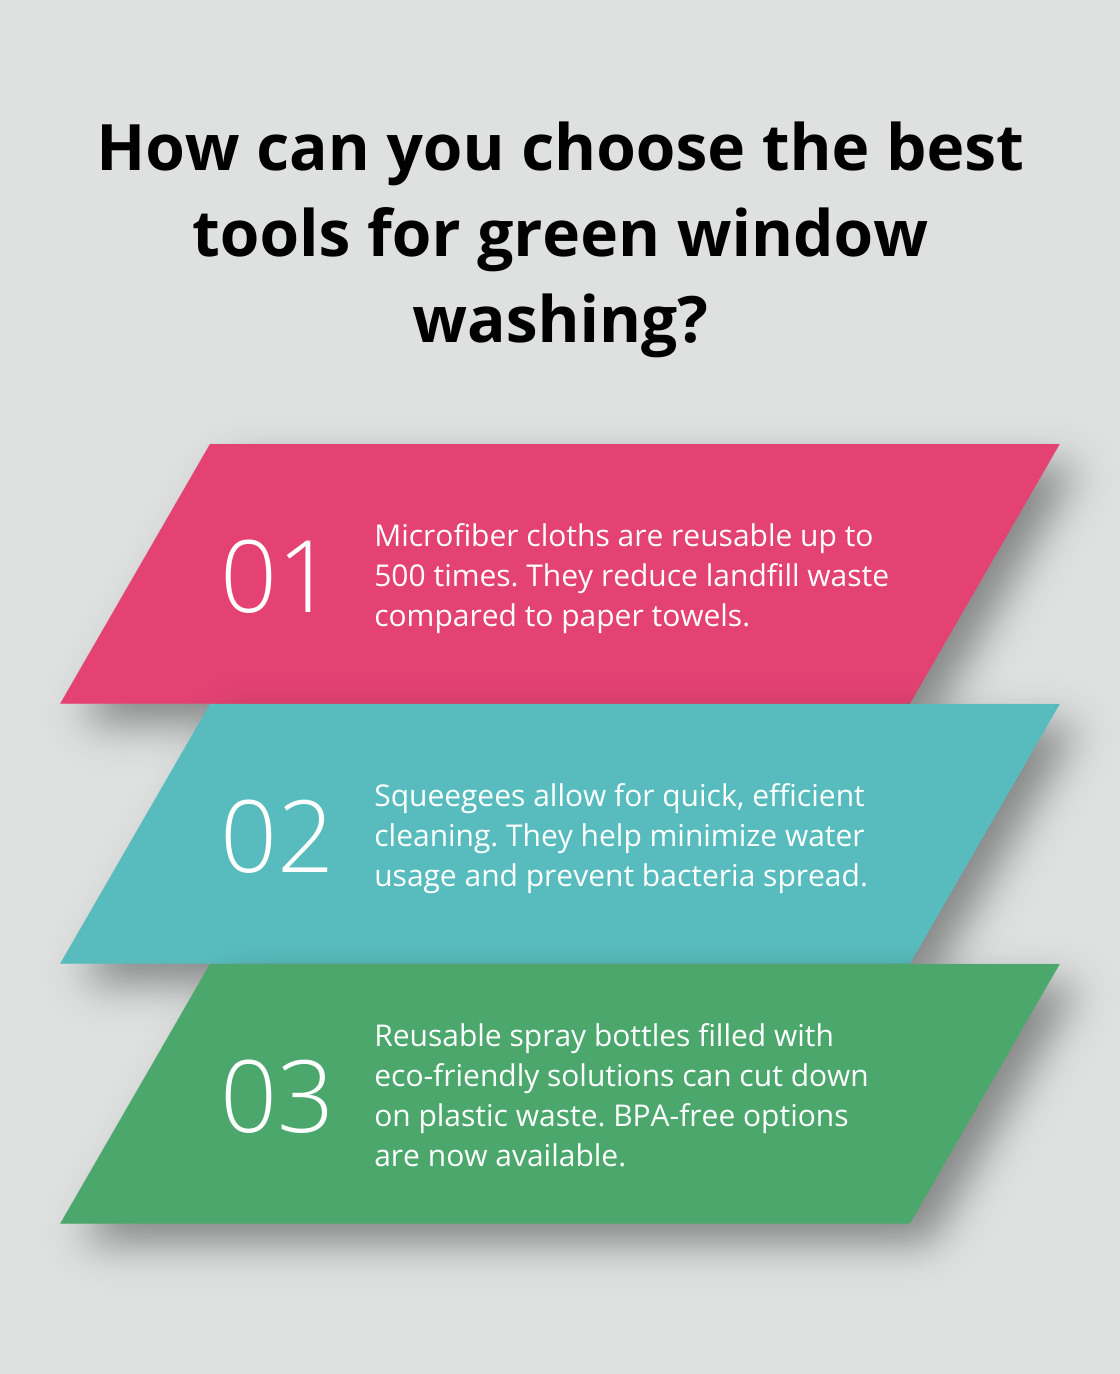 Fact - How can you choose the best tools for green window washing?